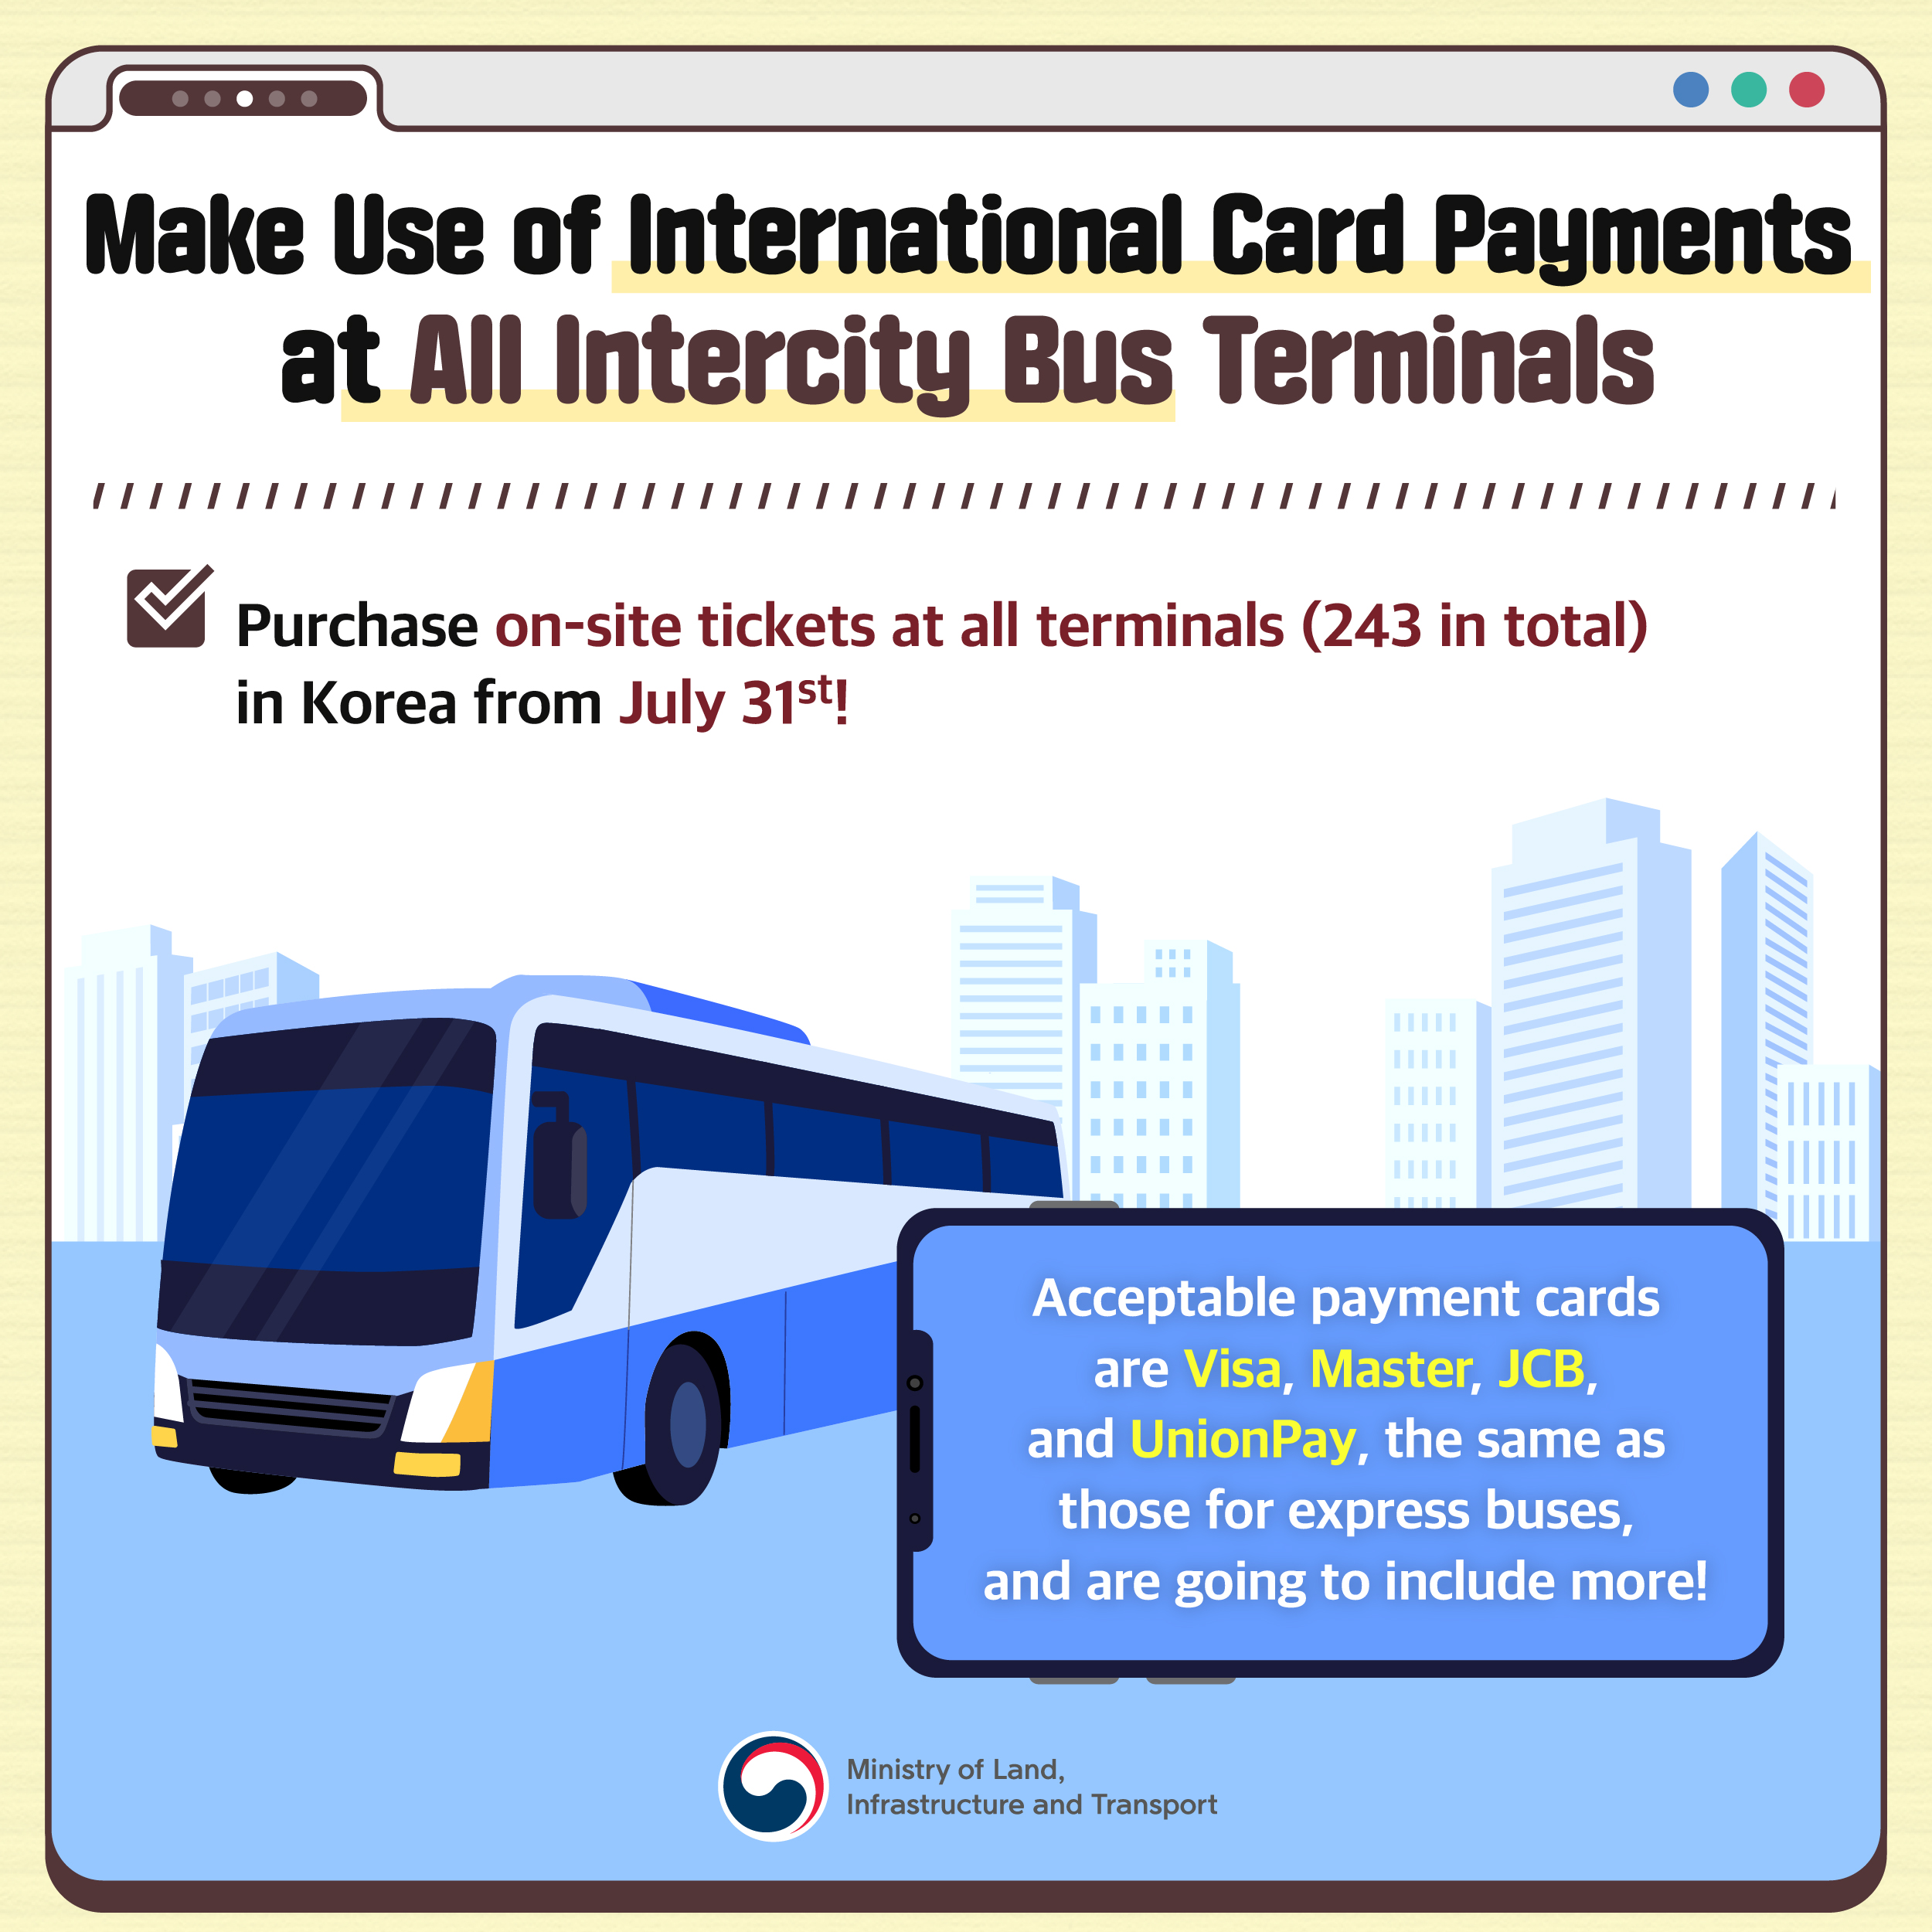 pic 4. Make Use of International Card Payments at All Intercity Bus Terminals

Purchase on-site tickets at all terminals (243 in total) in Korea from July 31st!

Acceptable payment cards are Visa, Master, JCB, and UnionPay, the same as those for express buses, and are going to include more!